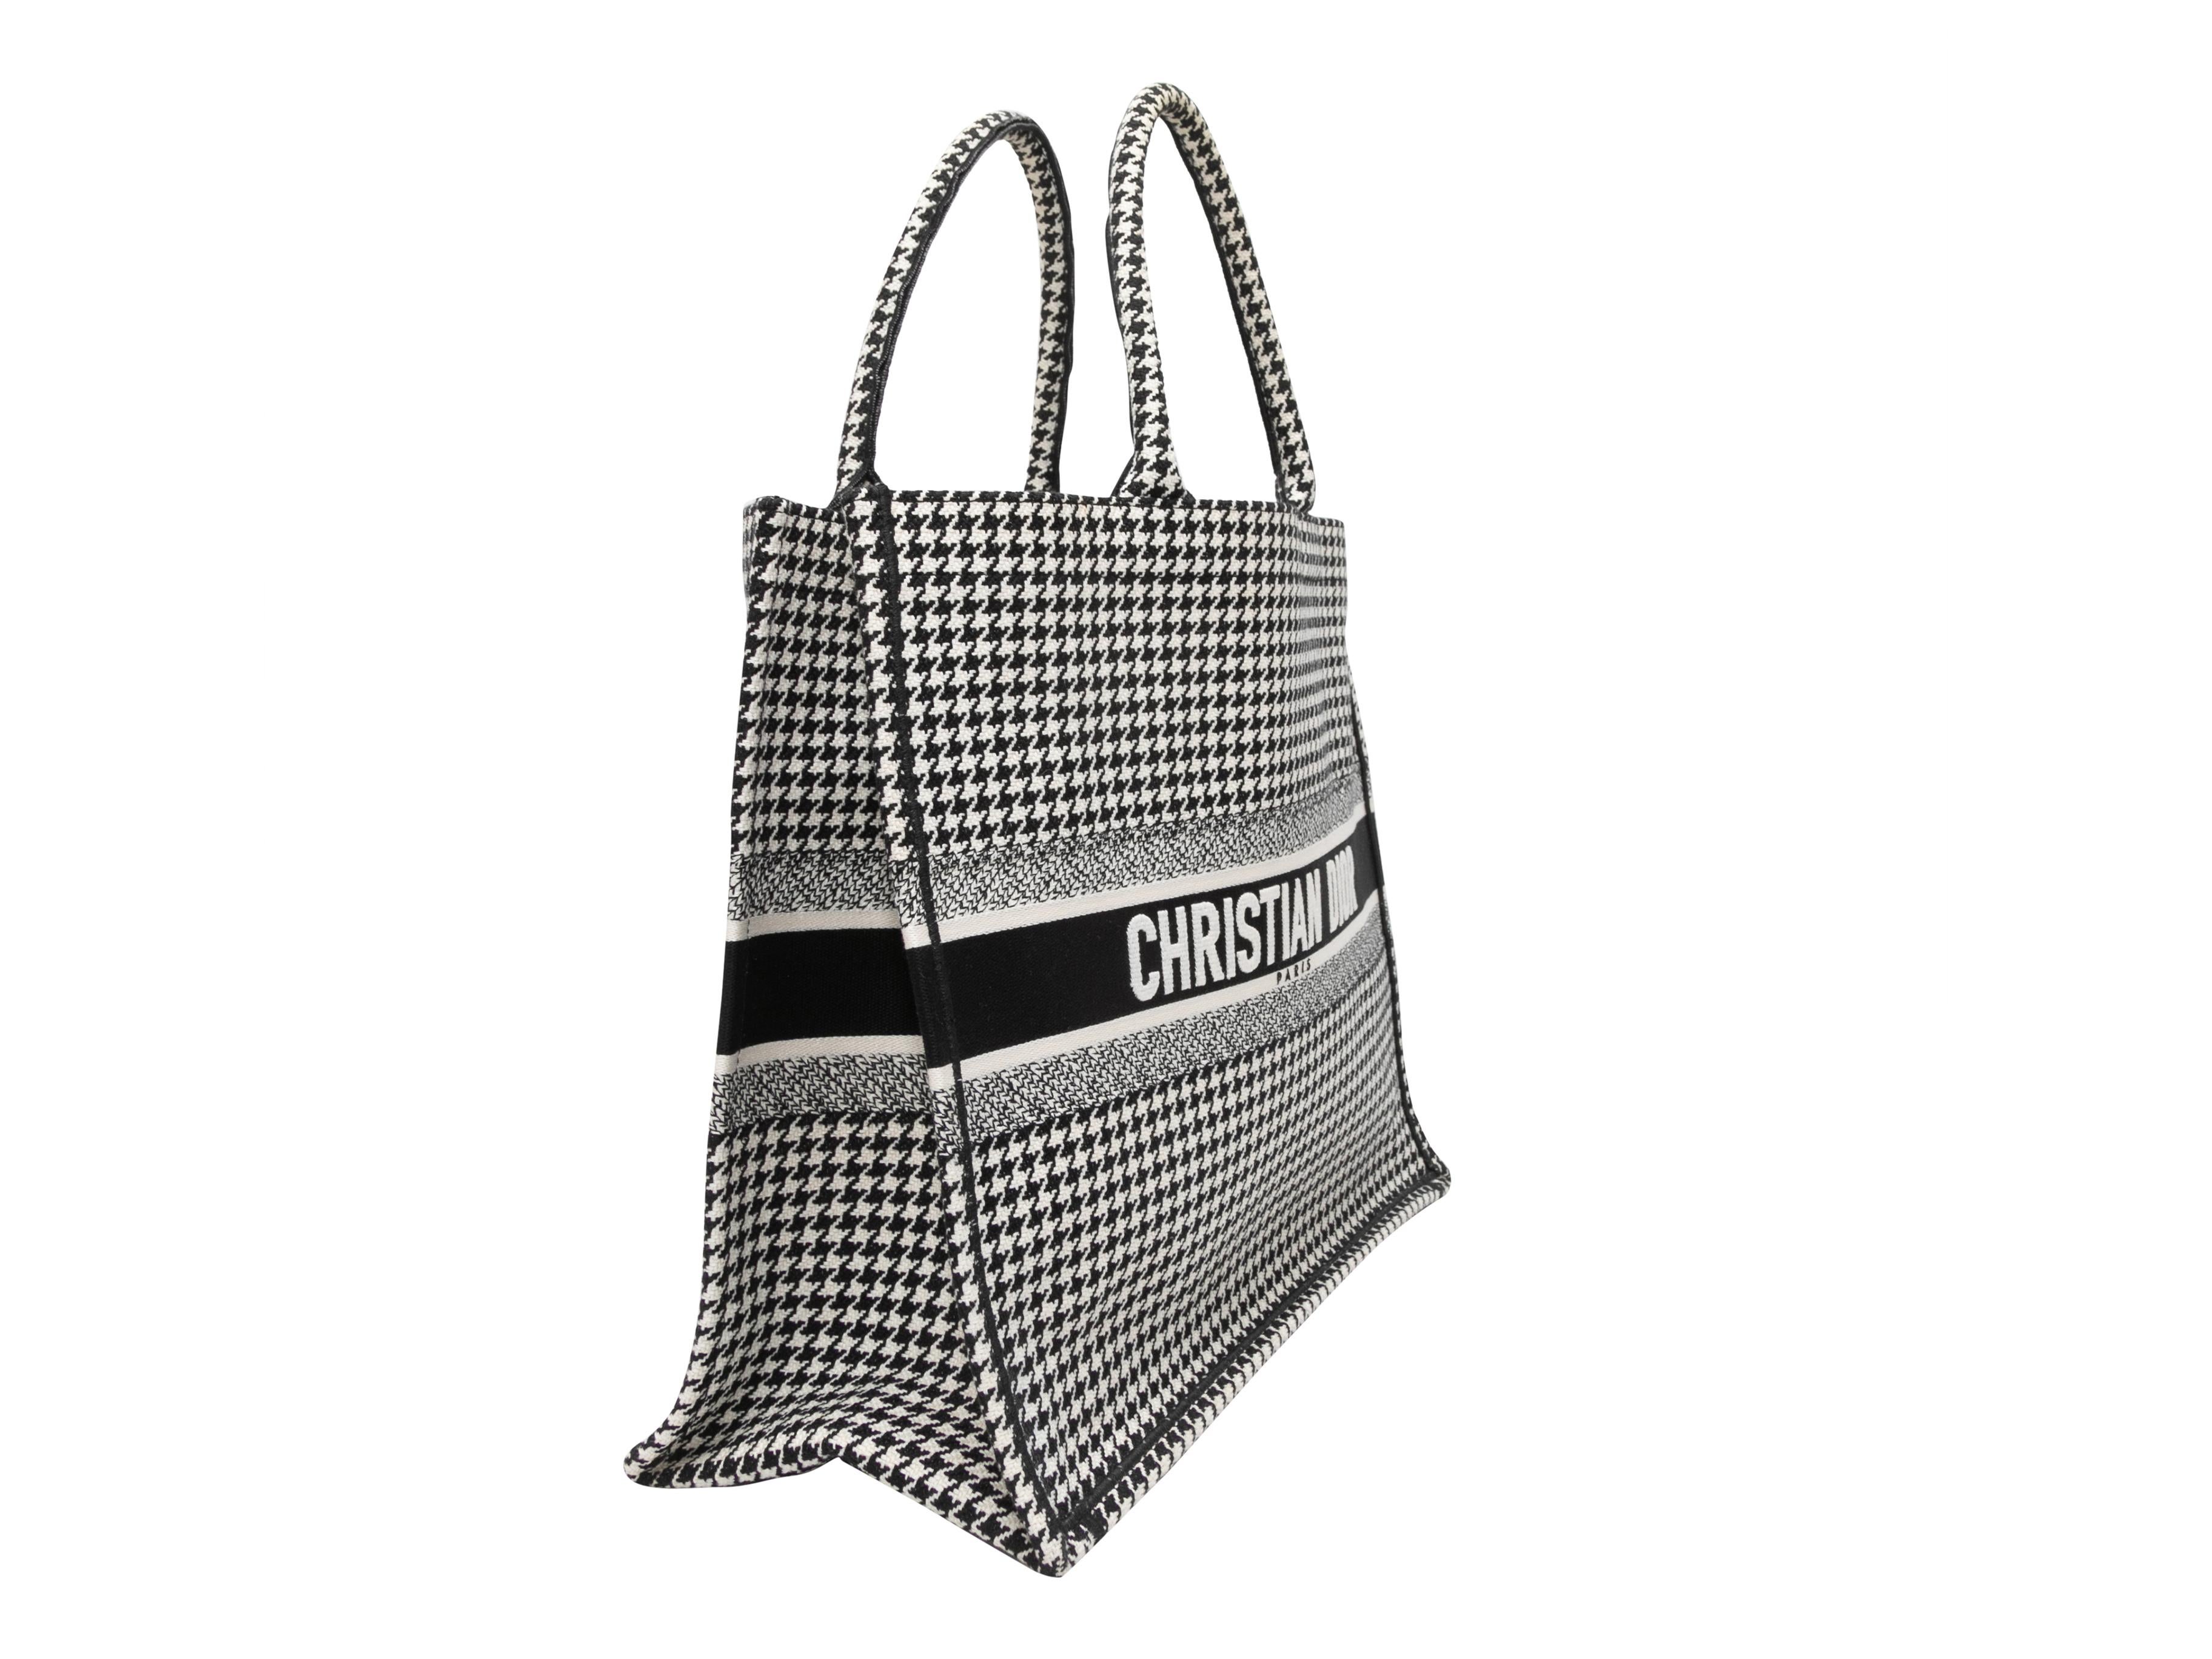 Black & White Christian Dior Medium Houndstooth Book Tote In Excellent Condition For Sale In New York, NY